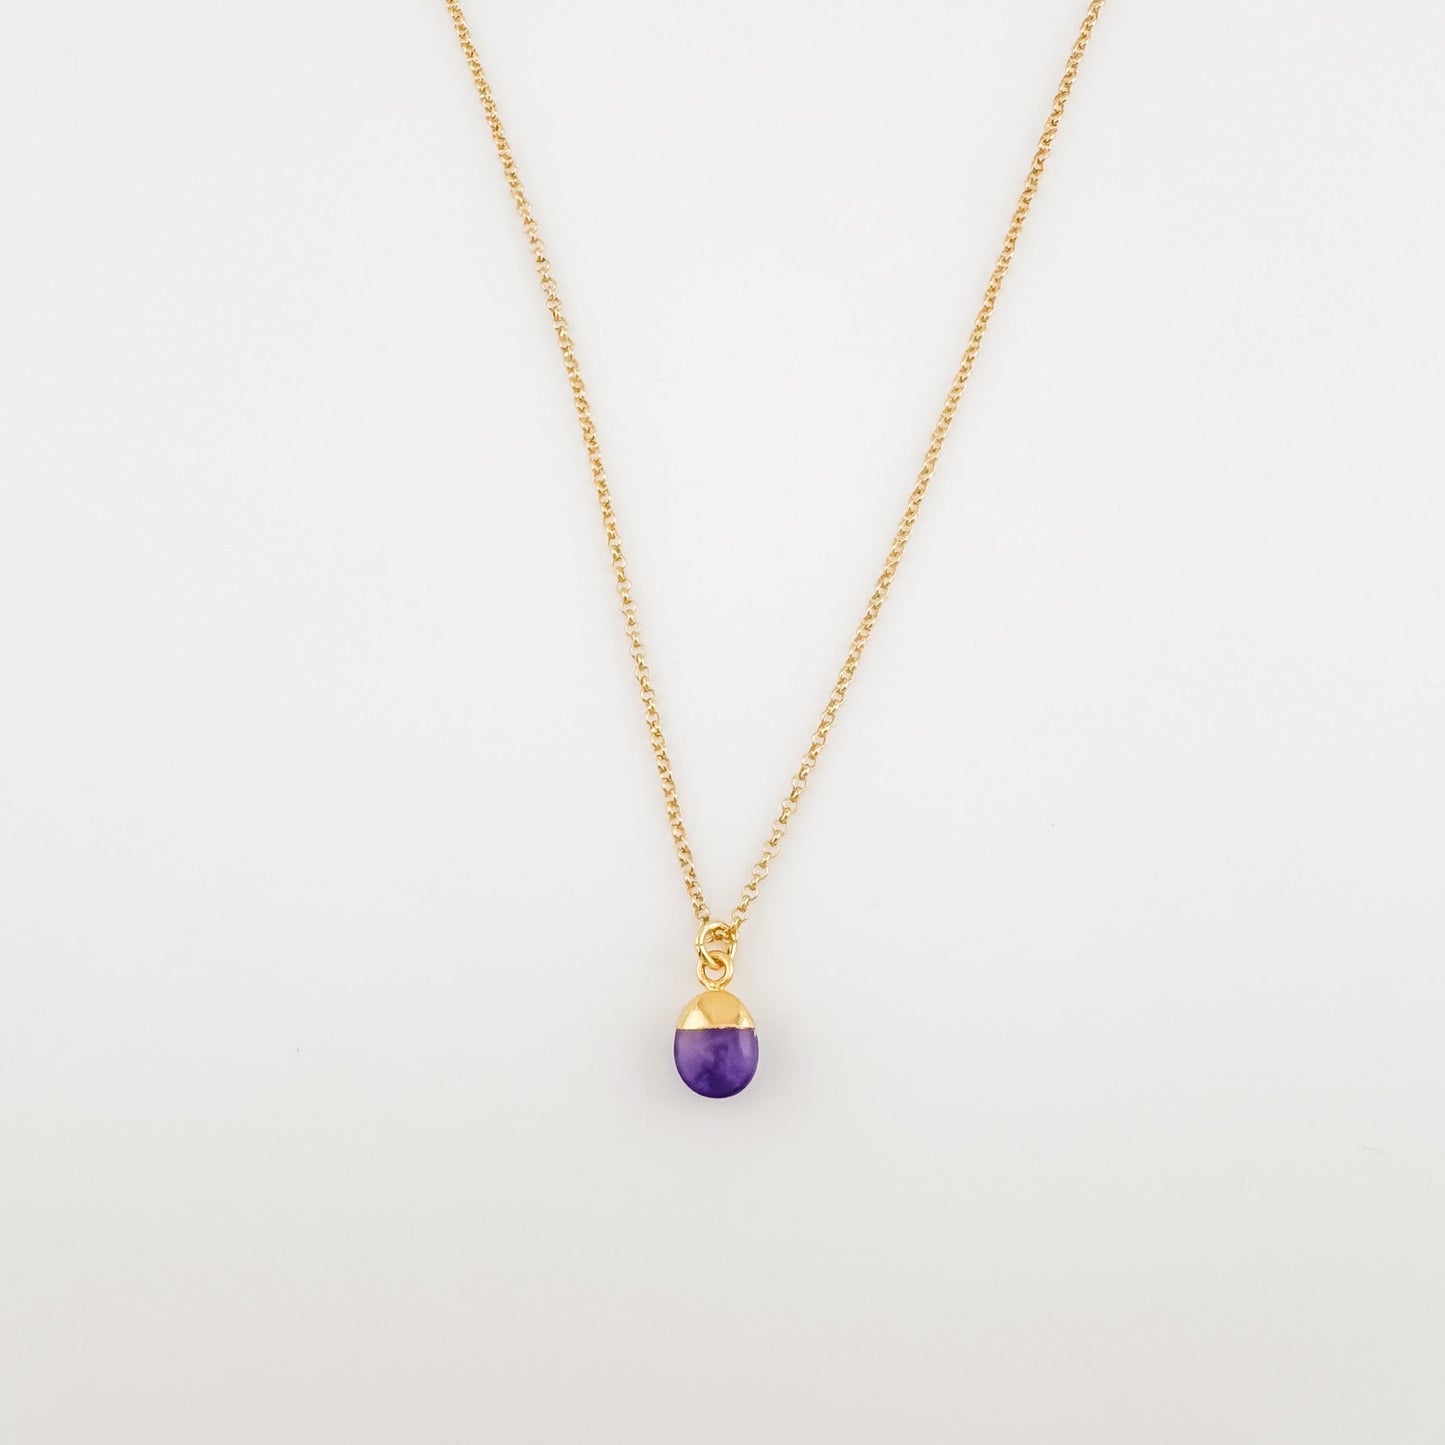 Amethyst tumbled necklace